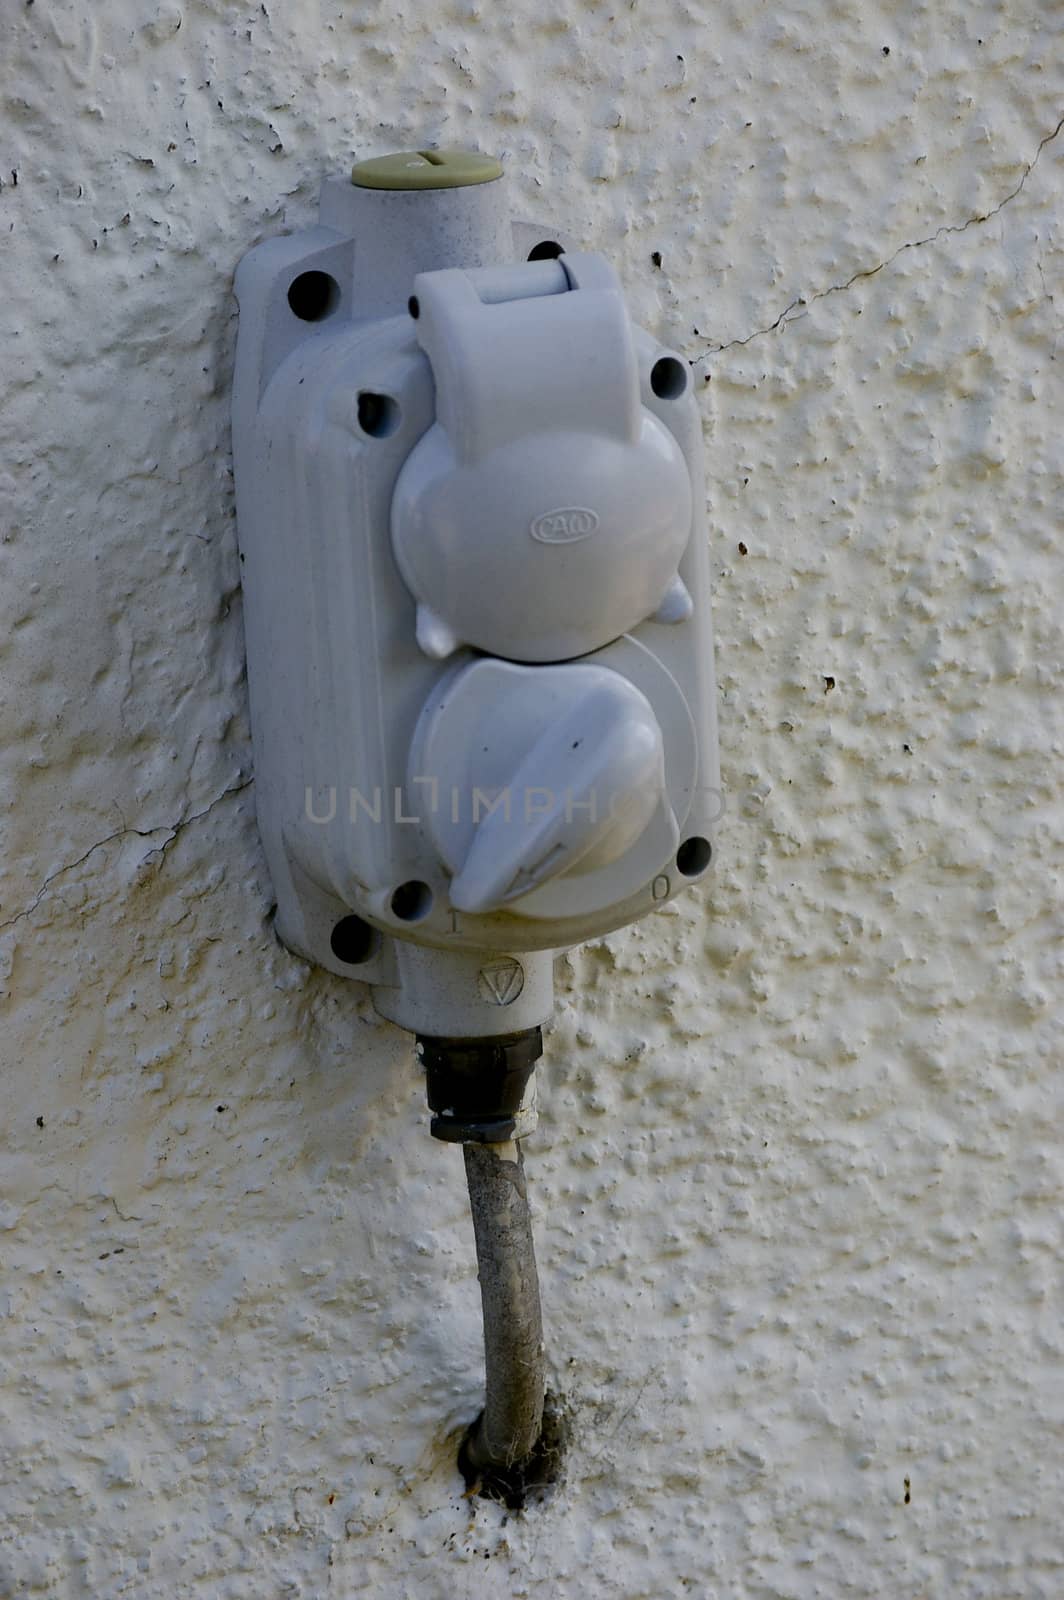 An old electrical socket with a switch. mounted on a white wall.